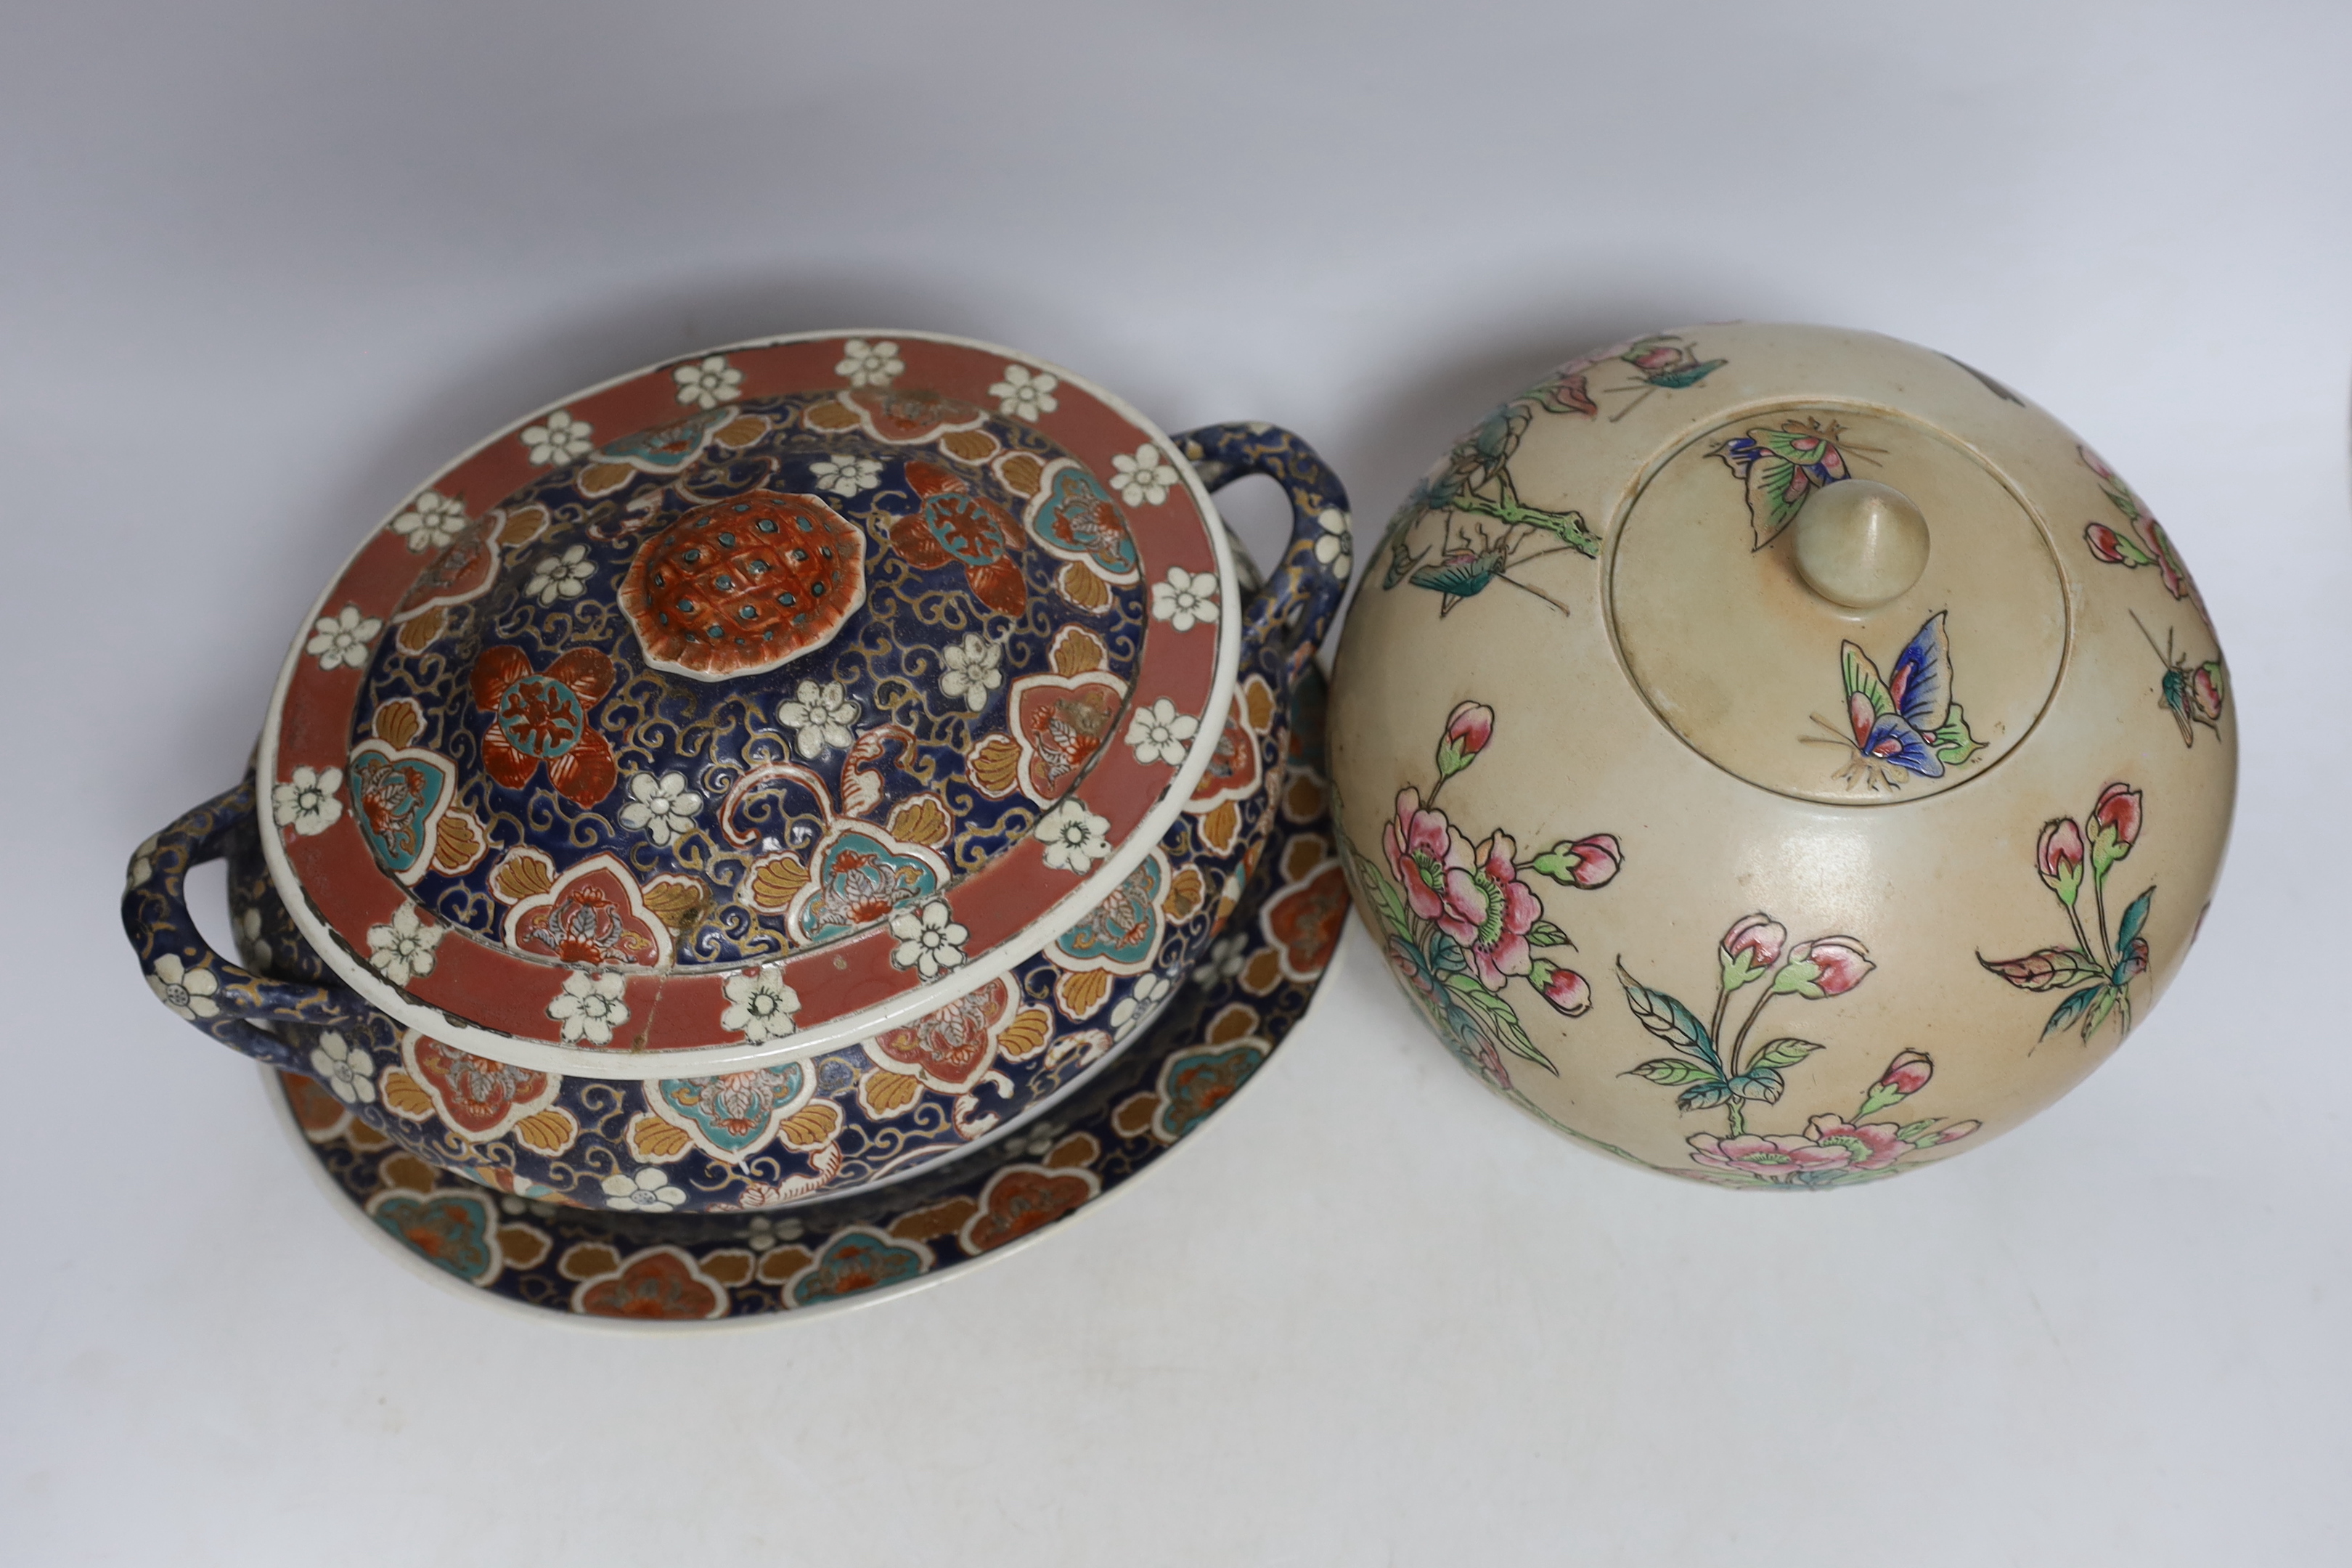 An Imari style tureen on stand and Chinese famille rose jar and cover, tallest 21cm